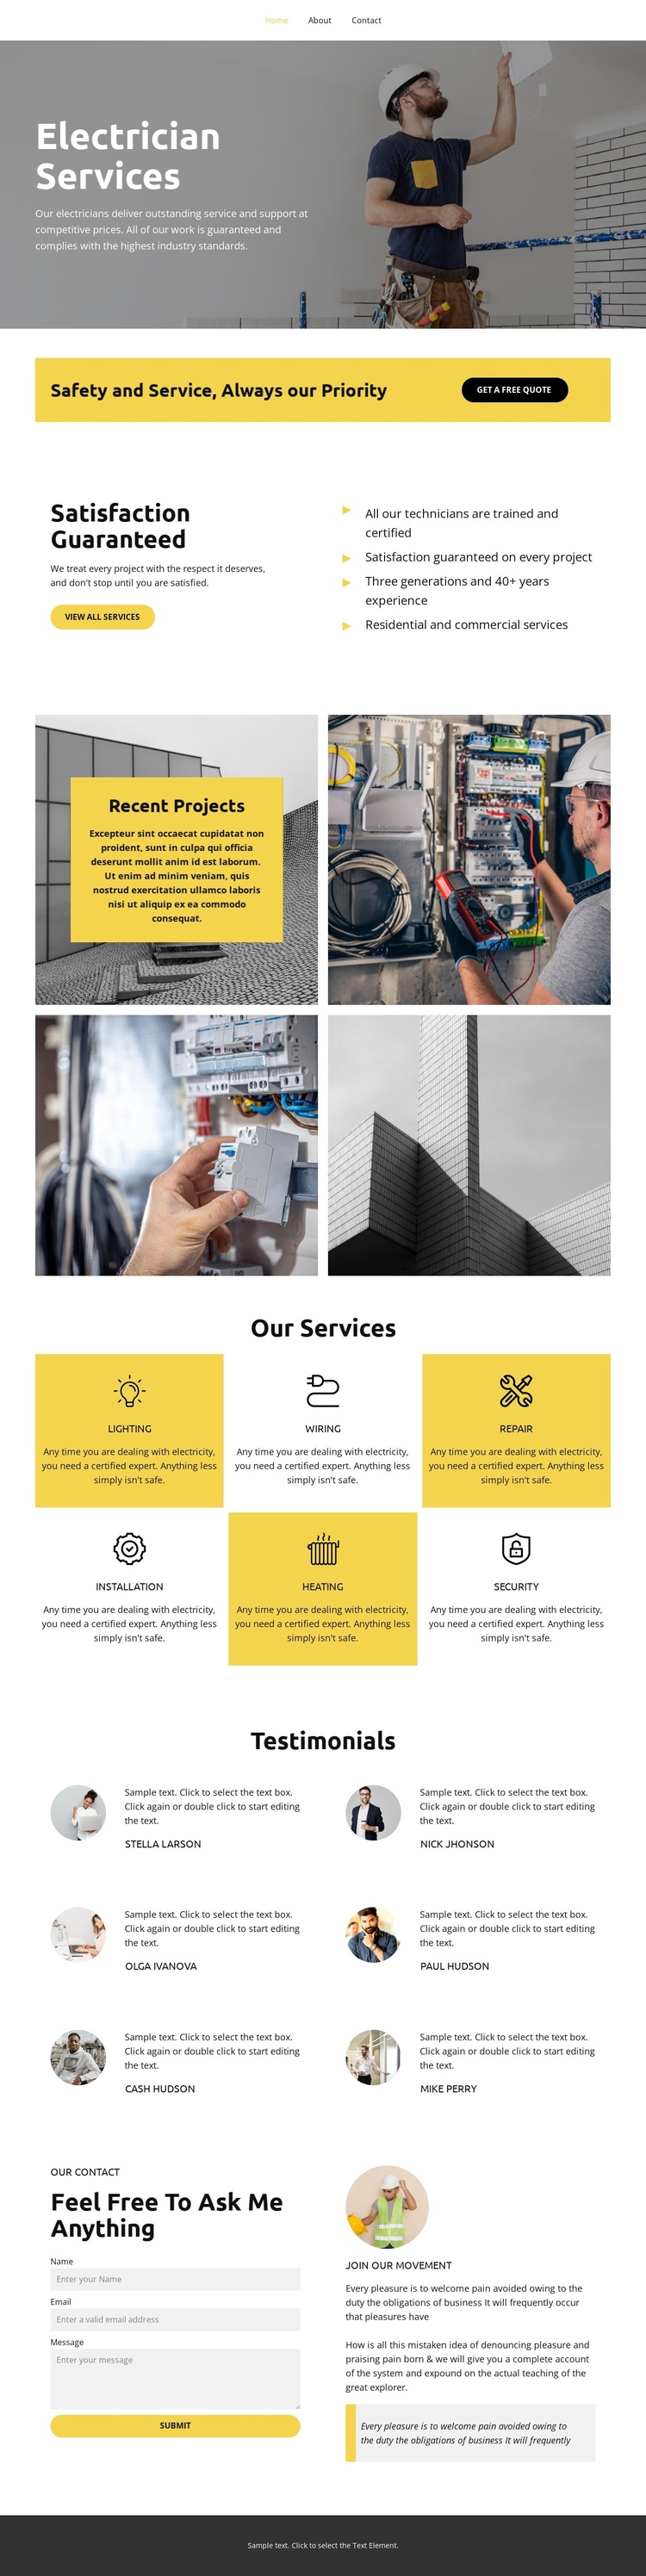 Electrician Services Template